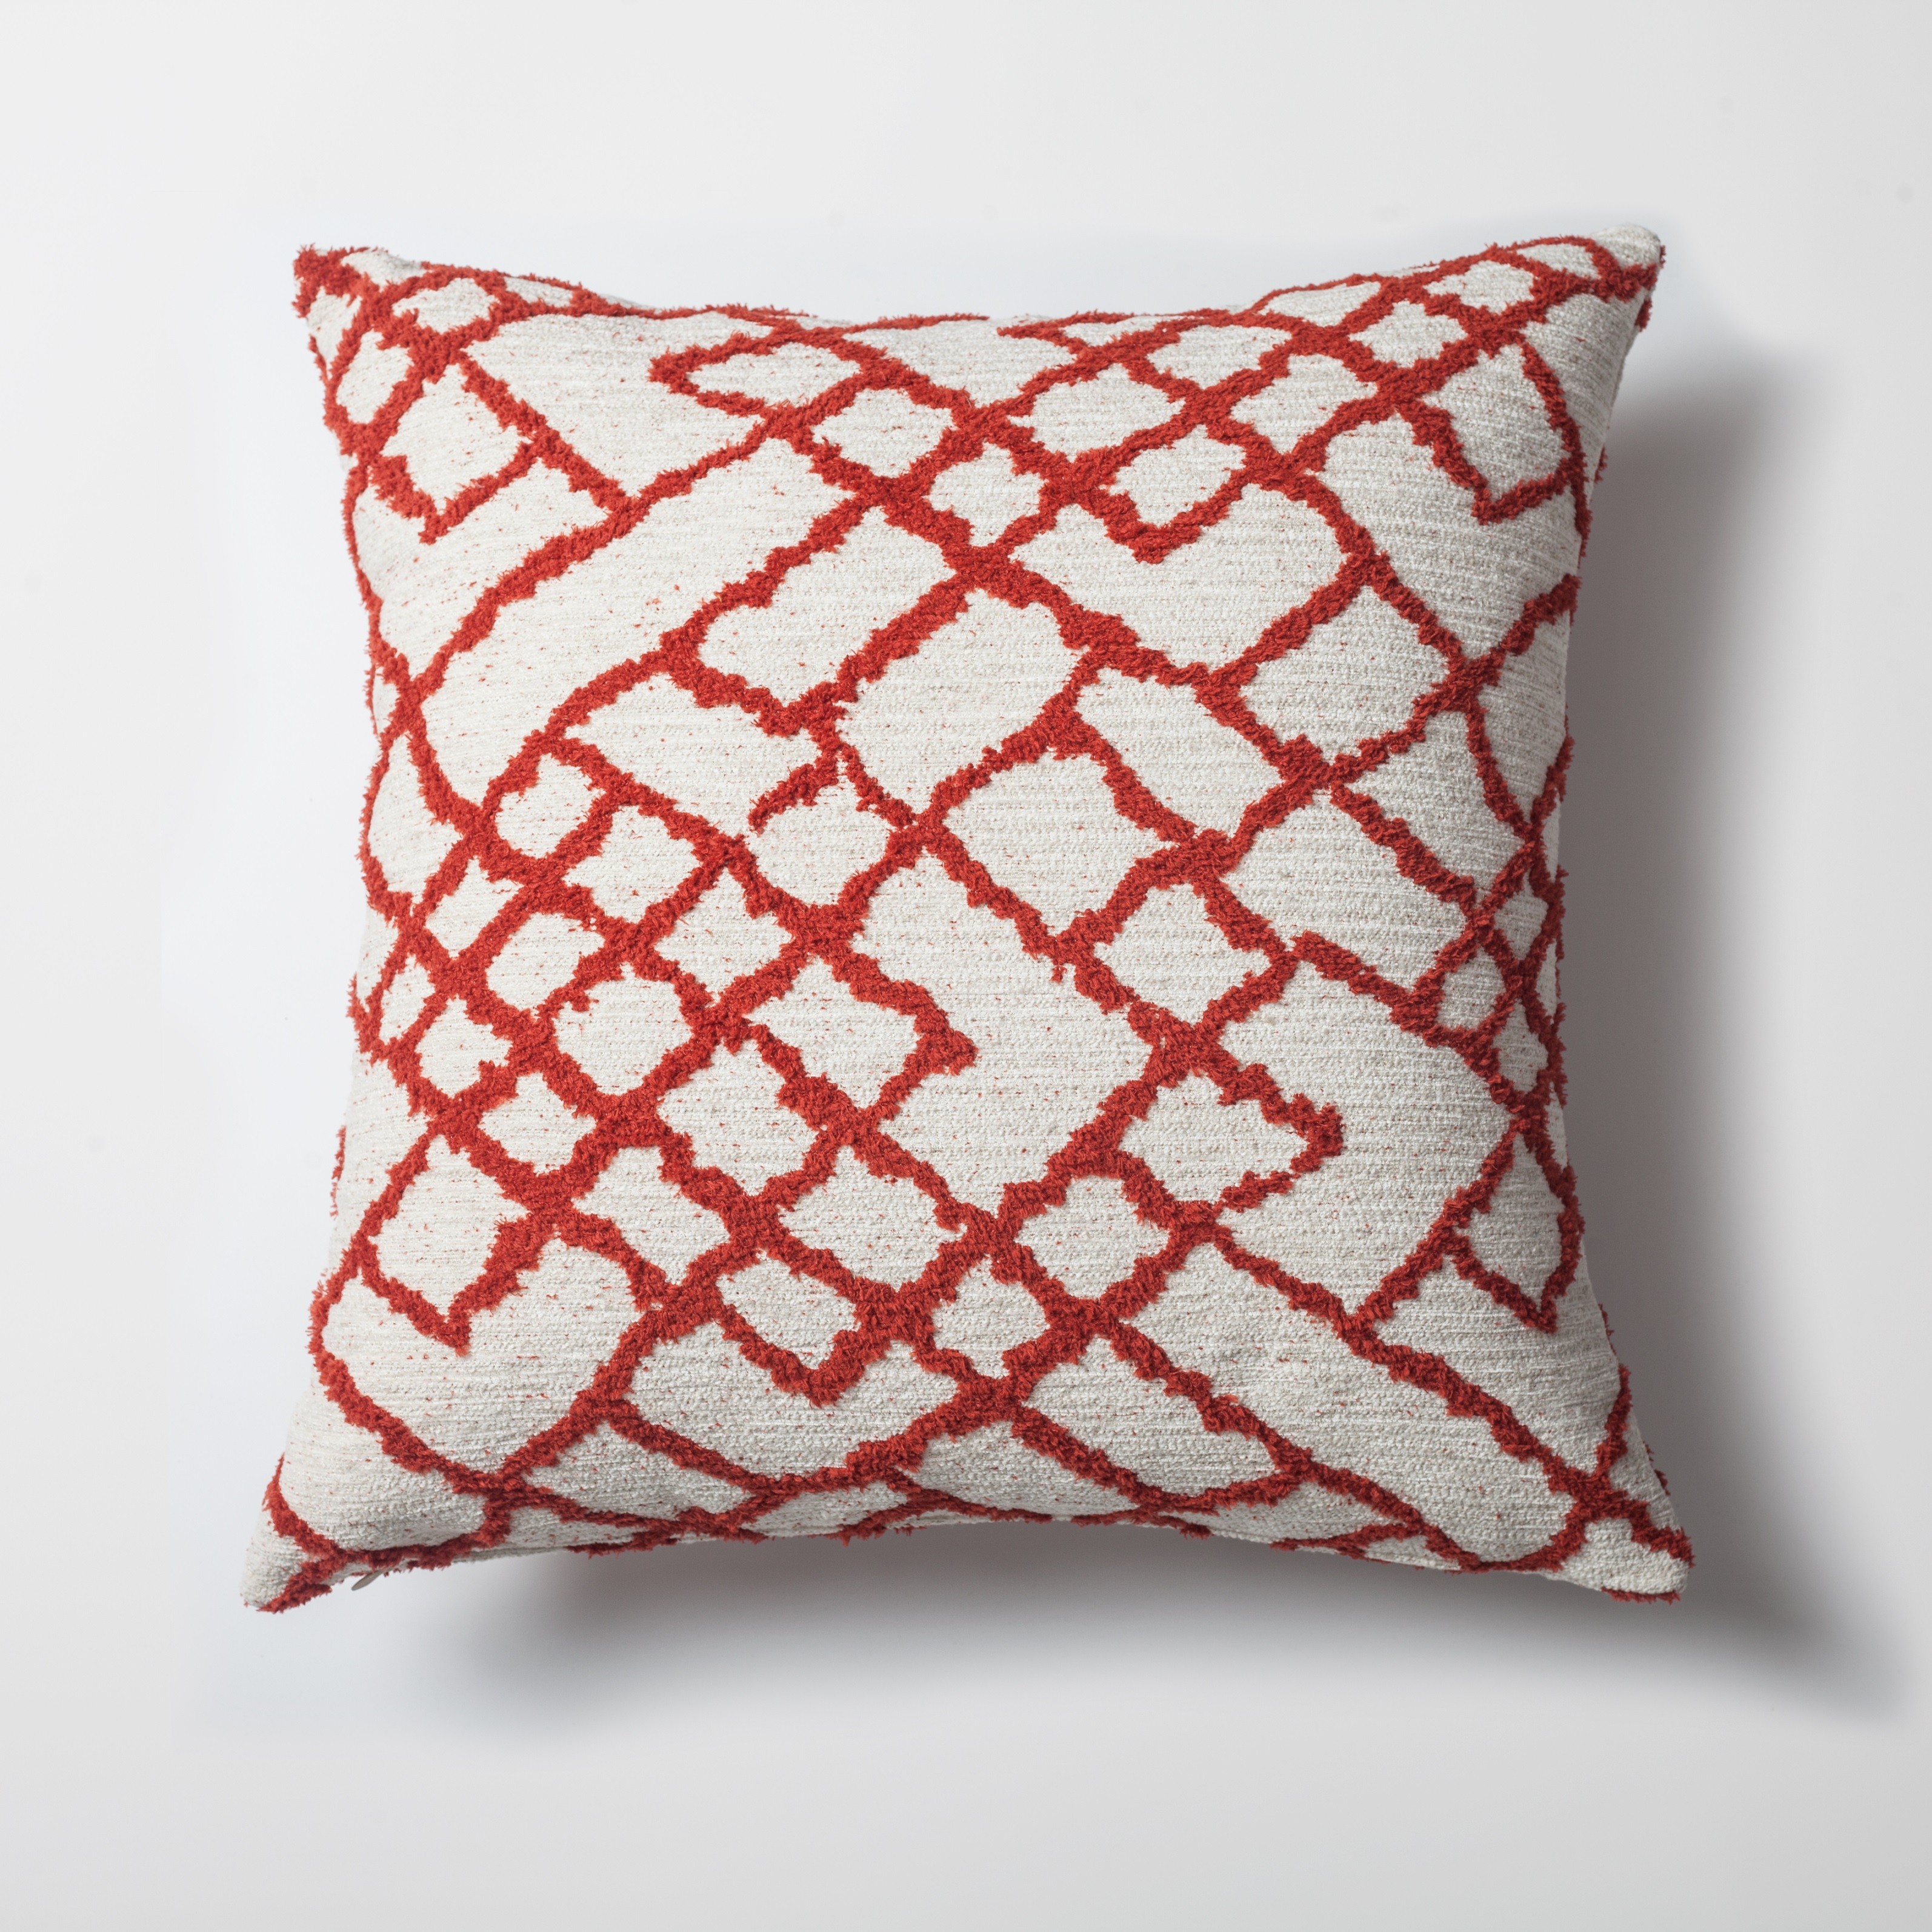 "Maya" - Ethnic Kilim Patterned Pillow 20x20 Inch - Red (Cover Only)